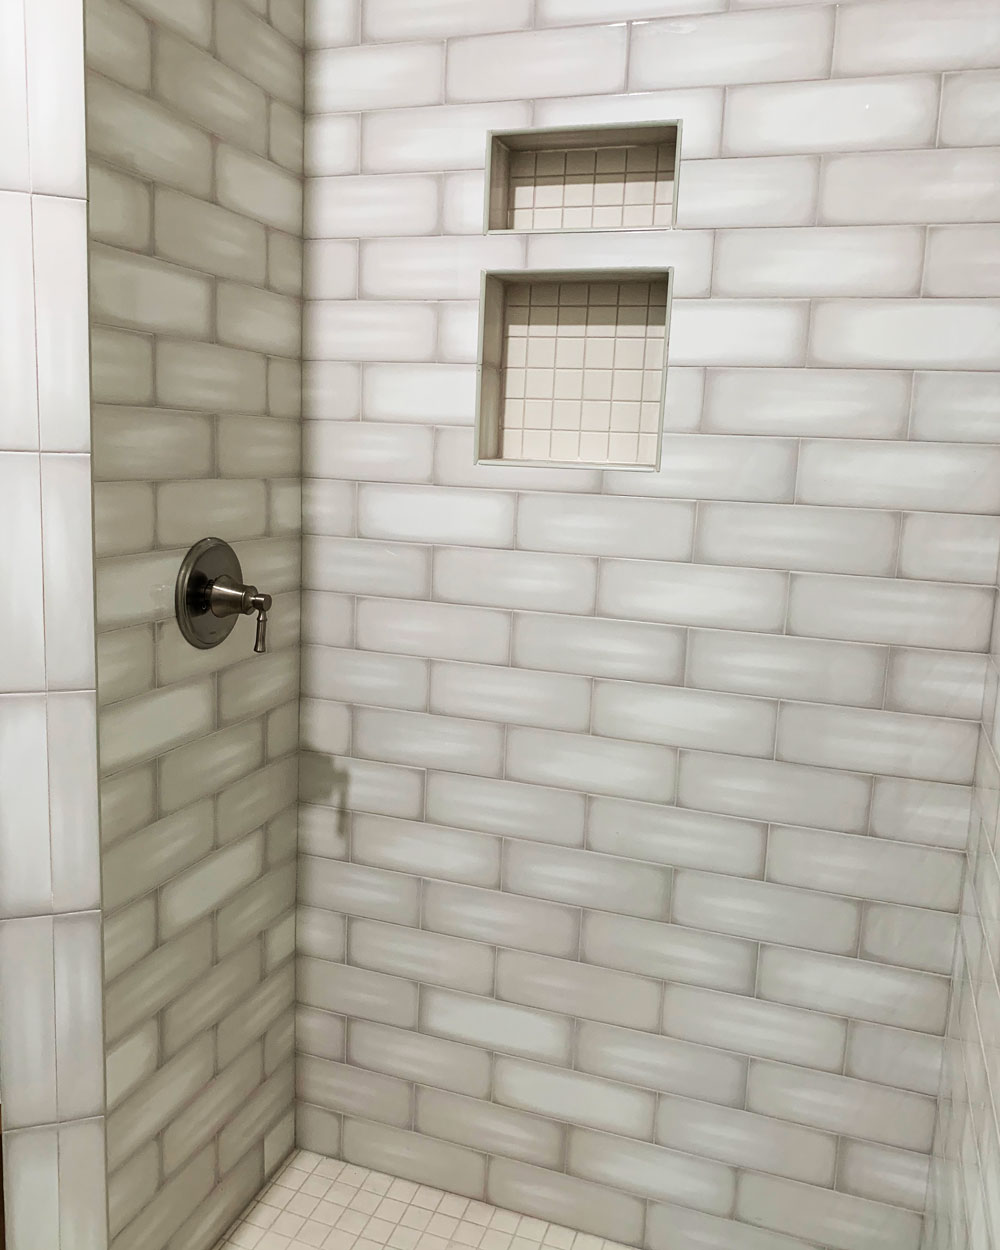 Bathroom shower wall with grey tiles